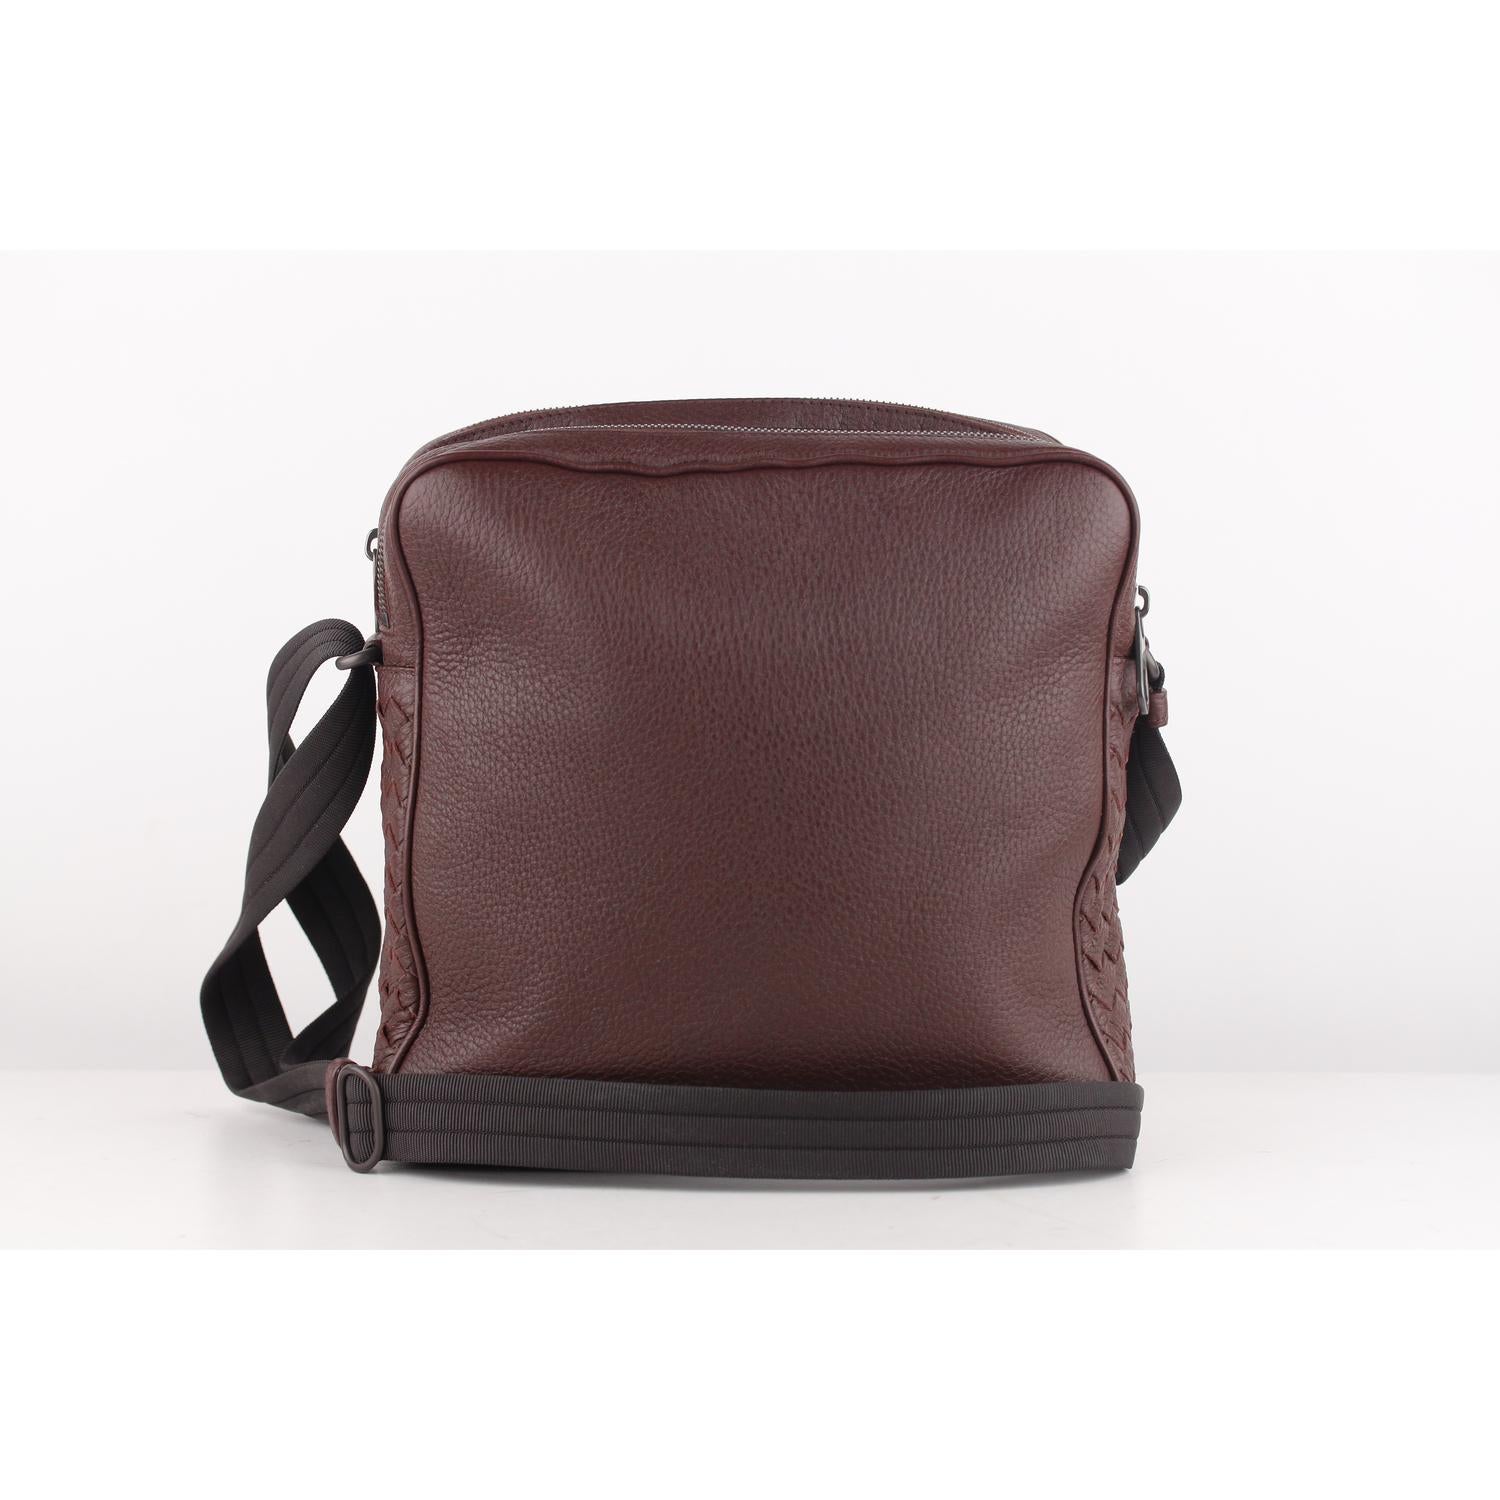 Bottega Veneta Brown Grained Leather Messenger Crossbody Bag

Material : Leather 
Color : Brown
Model : Messenger Bag
Gender : Women
Country of Manufacture : Italy
Size : Medium
Bag Depth : 3 inches - 7,6 cm 
Bag Height : 9.75 inches - 24,8 cm 
Bag